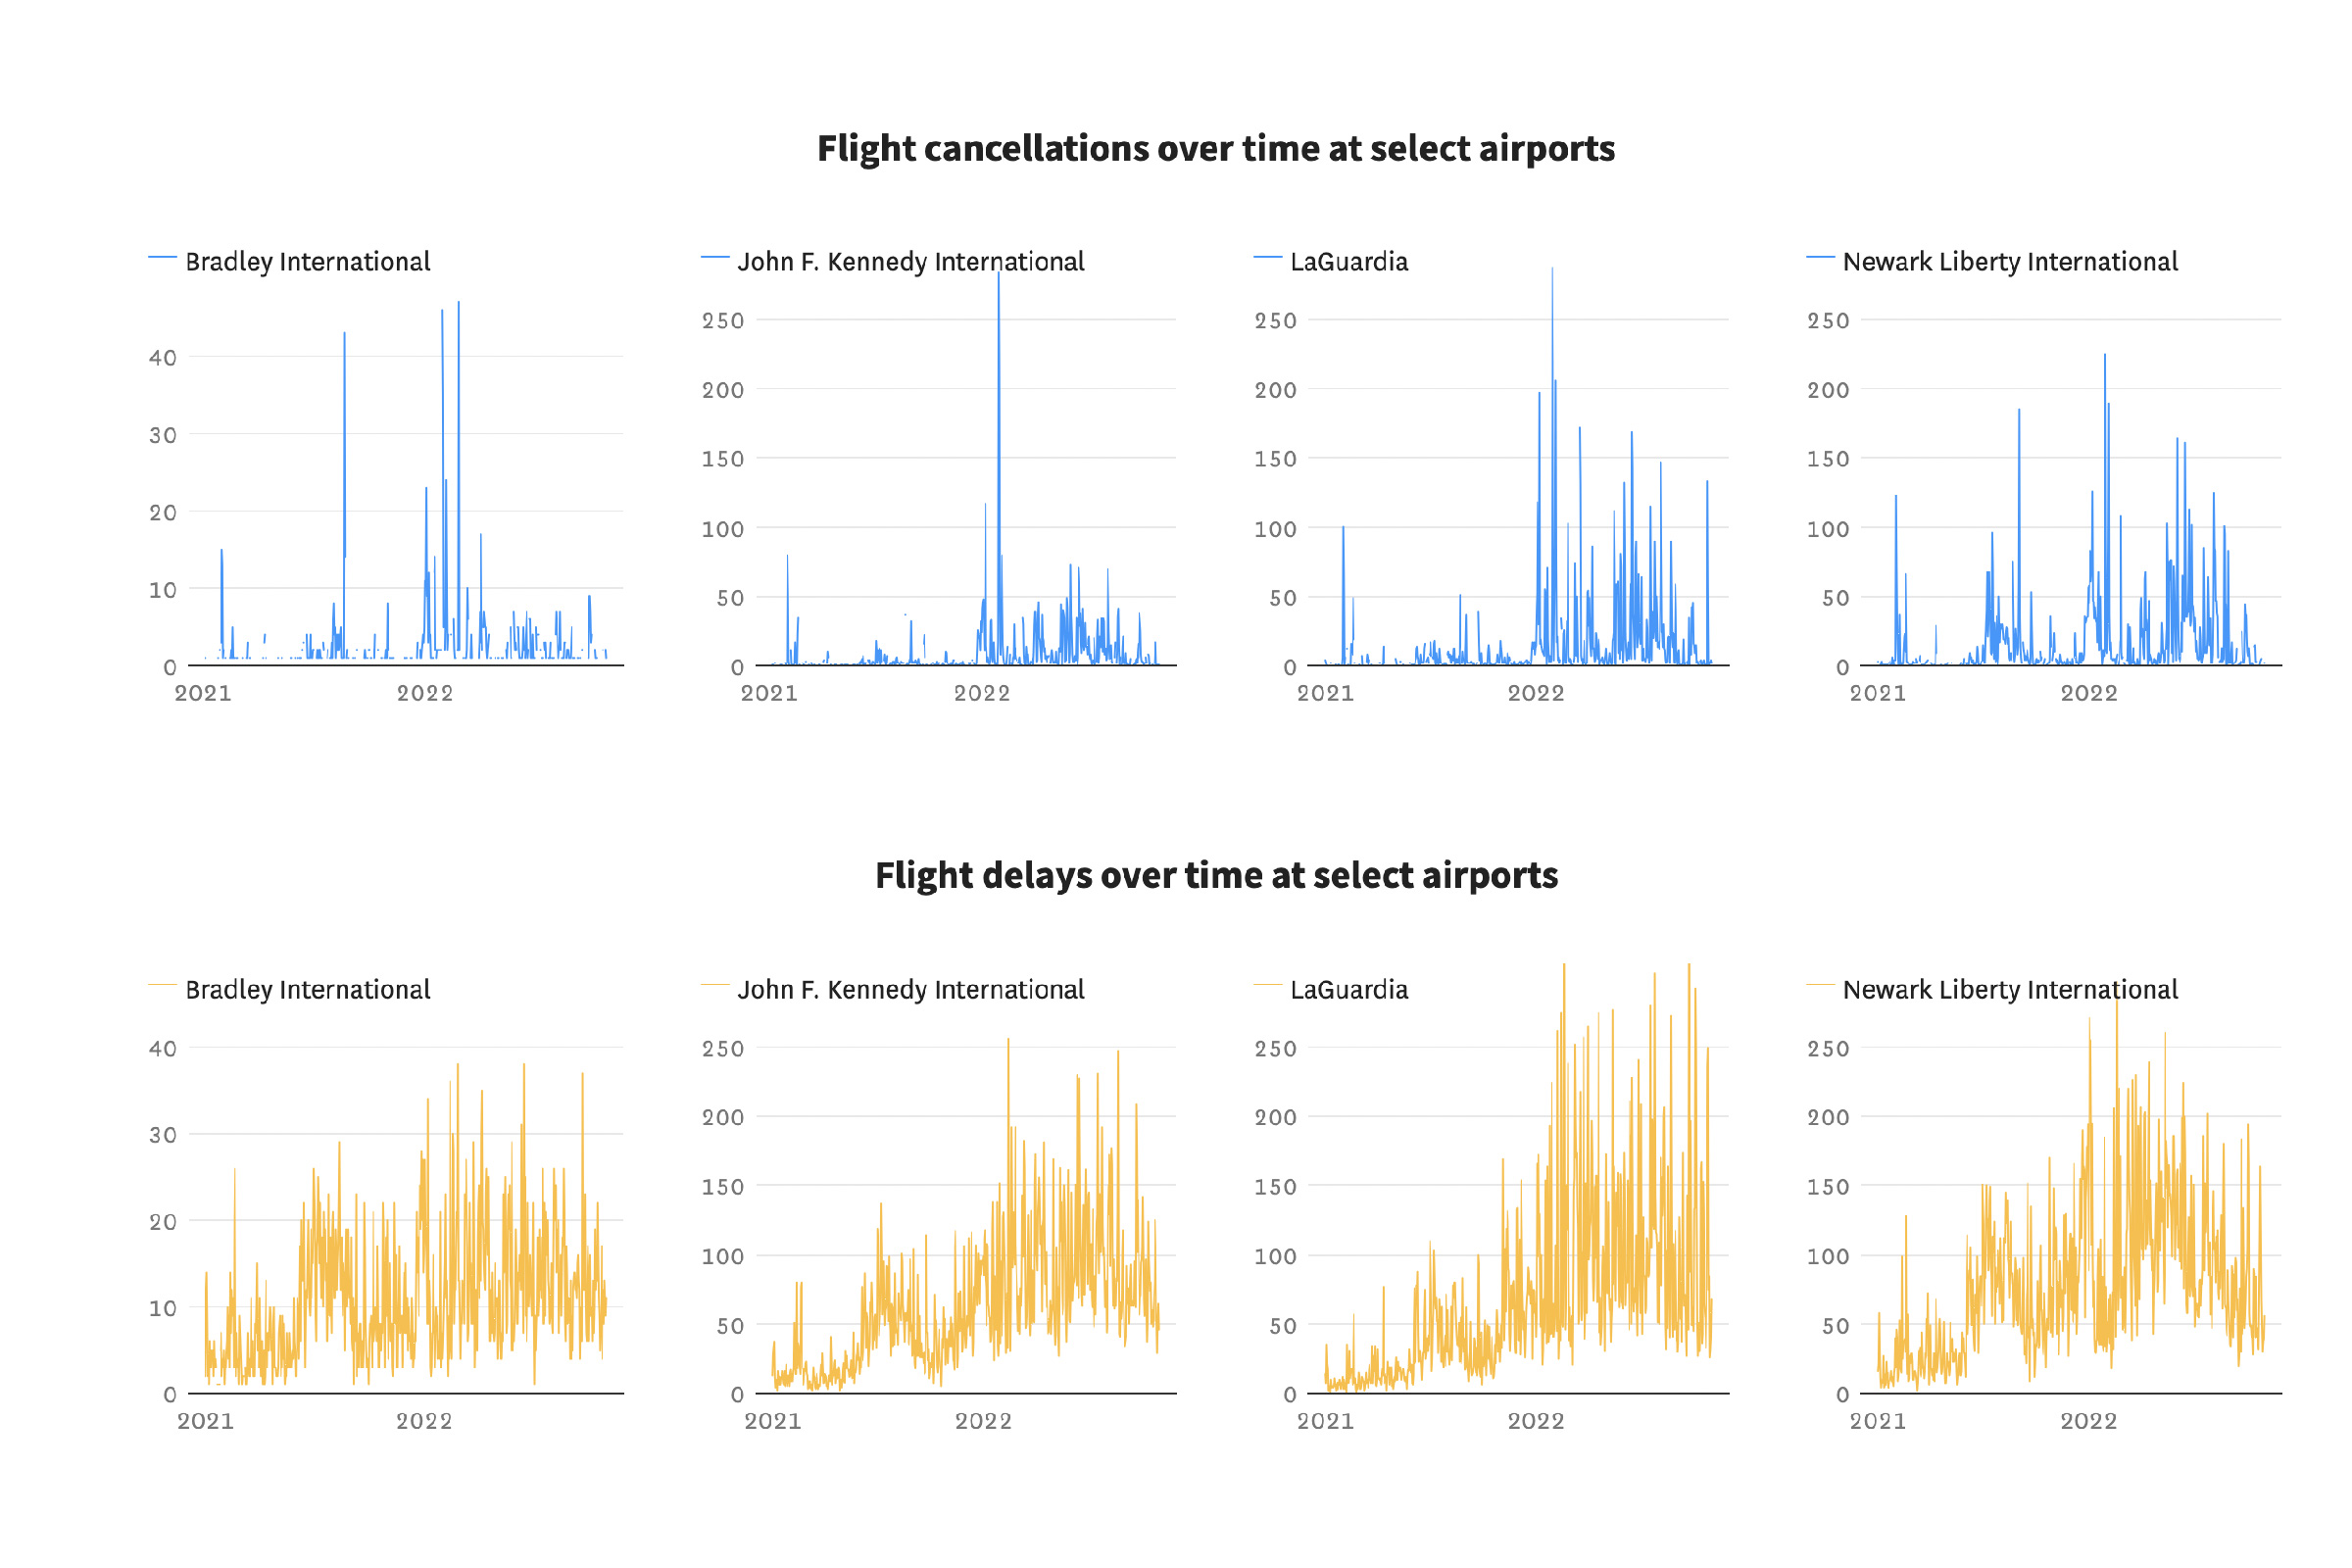 Small multiple line charts showing flight cancellations and delays over time at select airports.